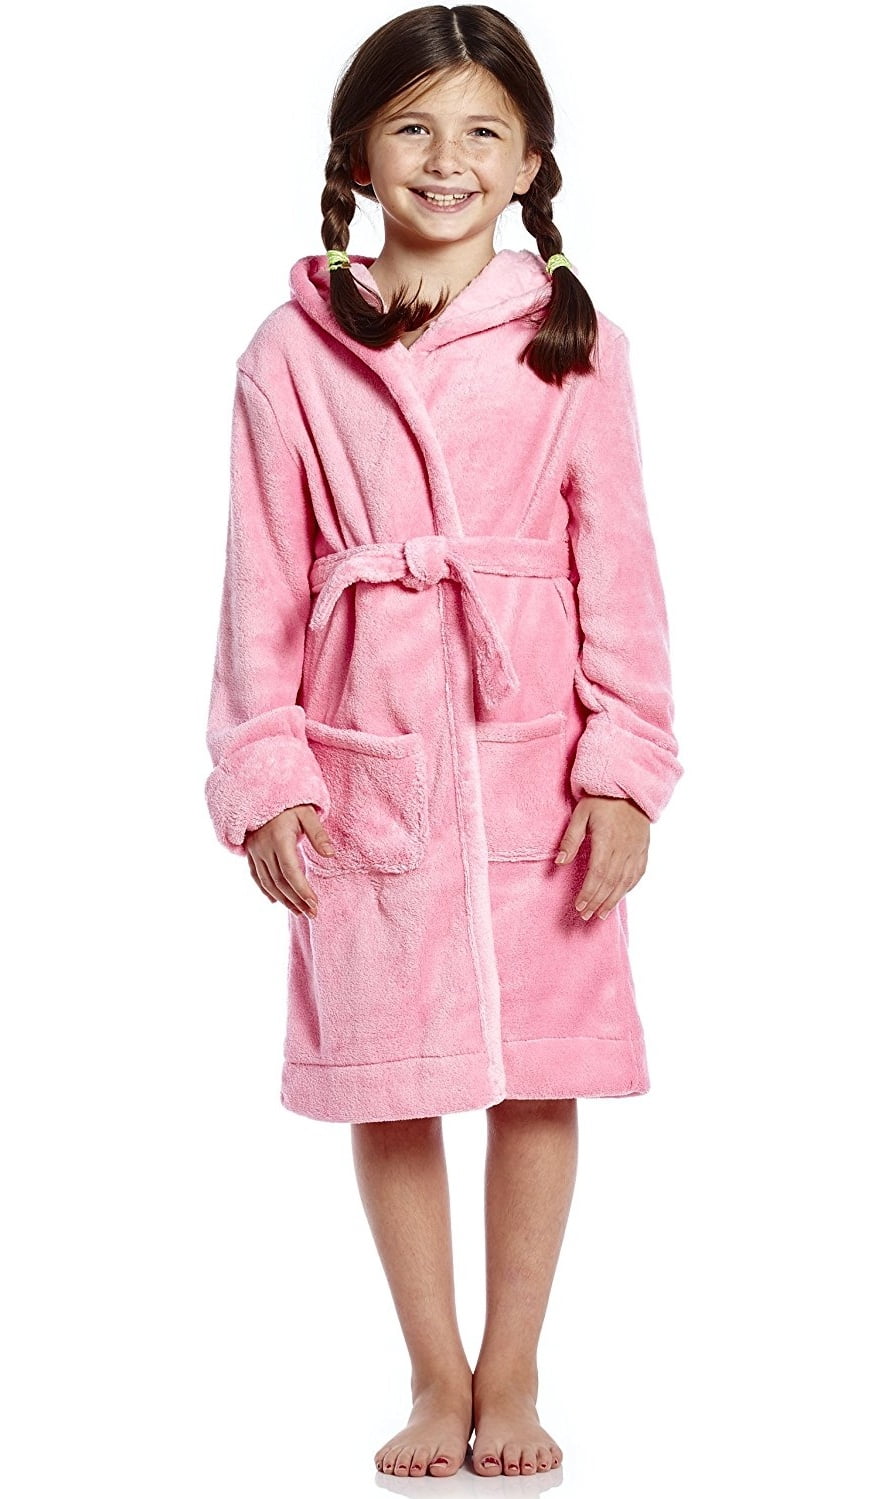 Aibrou Kids Fleece Dressing Gown Bathrobe Hooded Nightgown Housecoat with Ears 